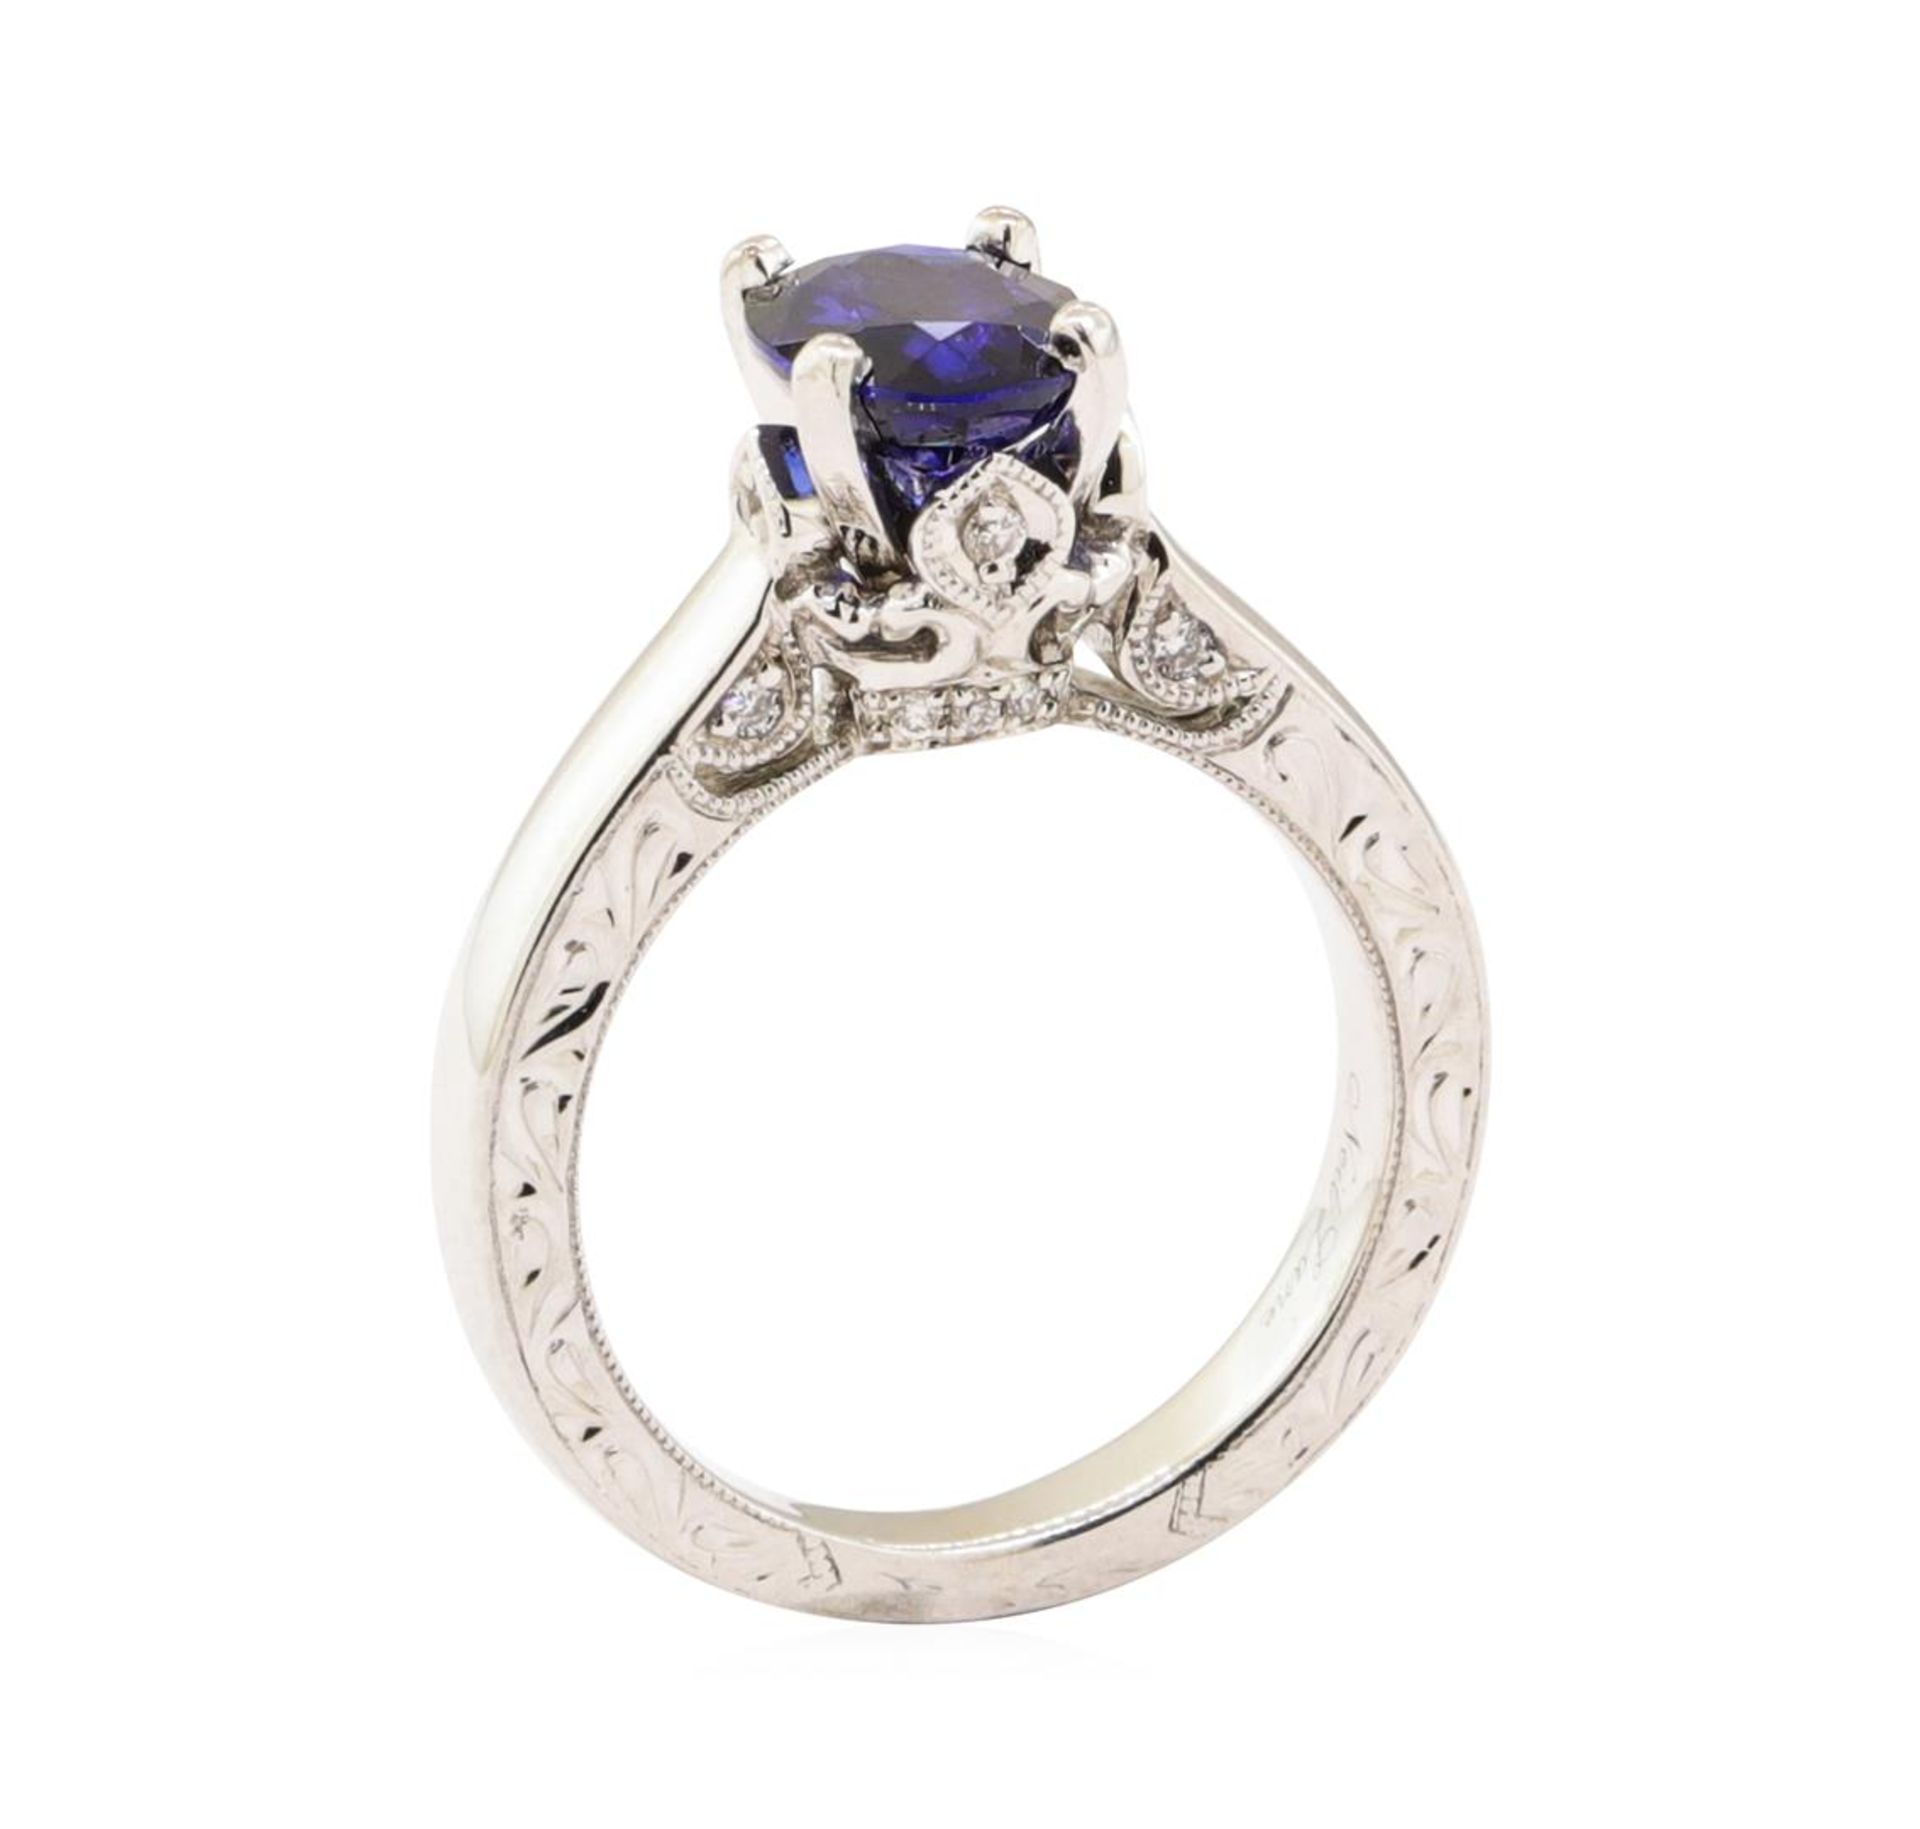 1.66 ctw Blue Sapphire and Diamond Ring - 14KT White Gold - Image 4 of 4